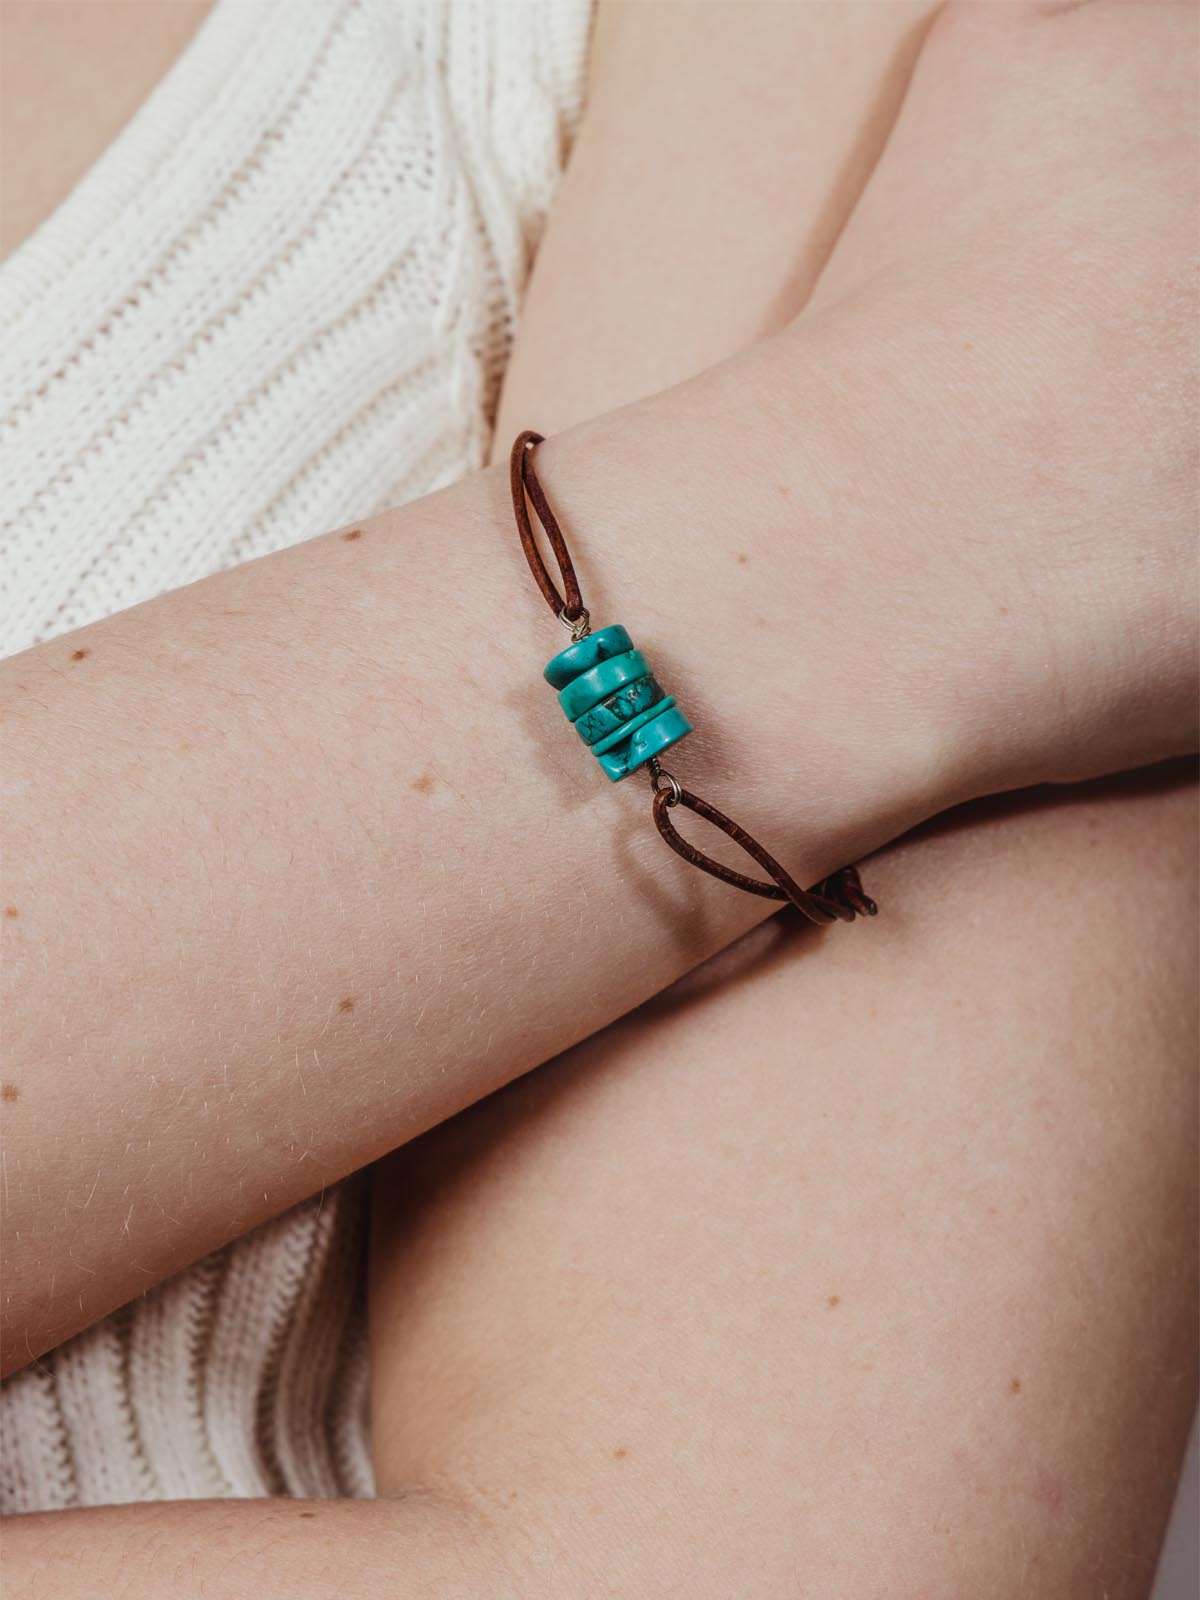 Model wearing leather adjustable bracelet with turquoise beads.